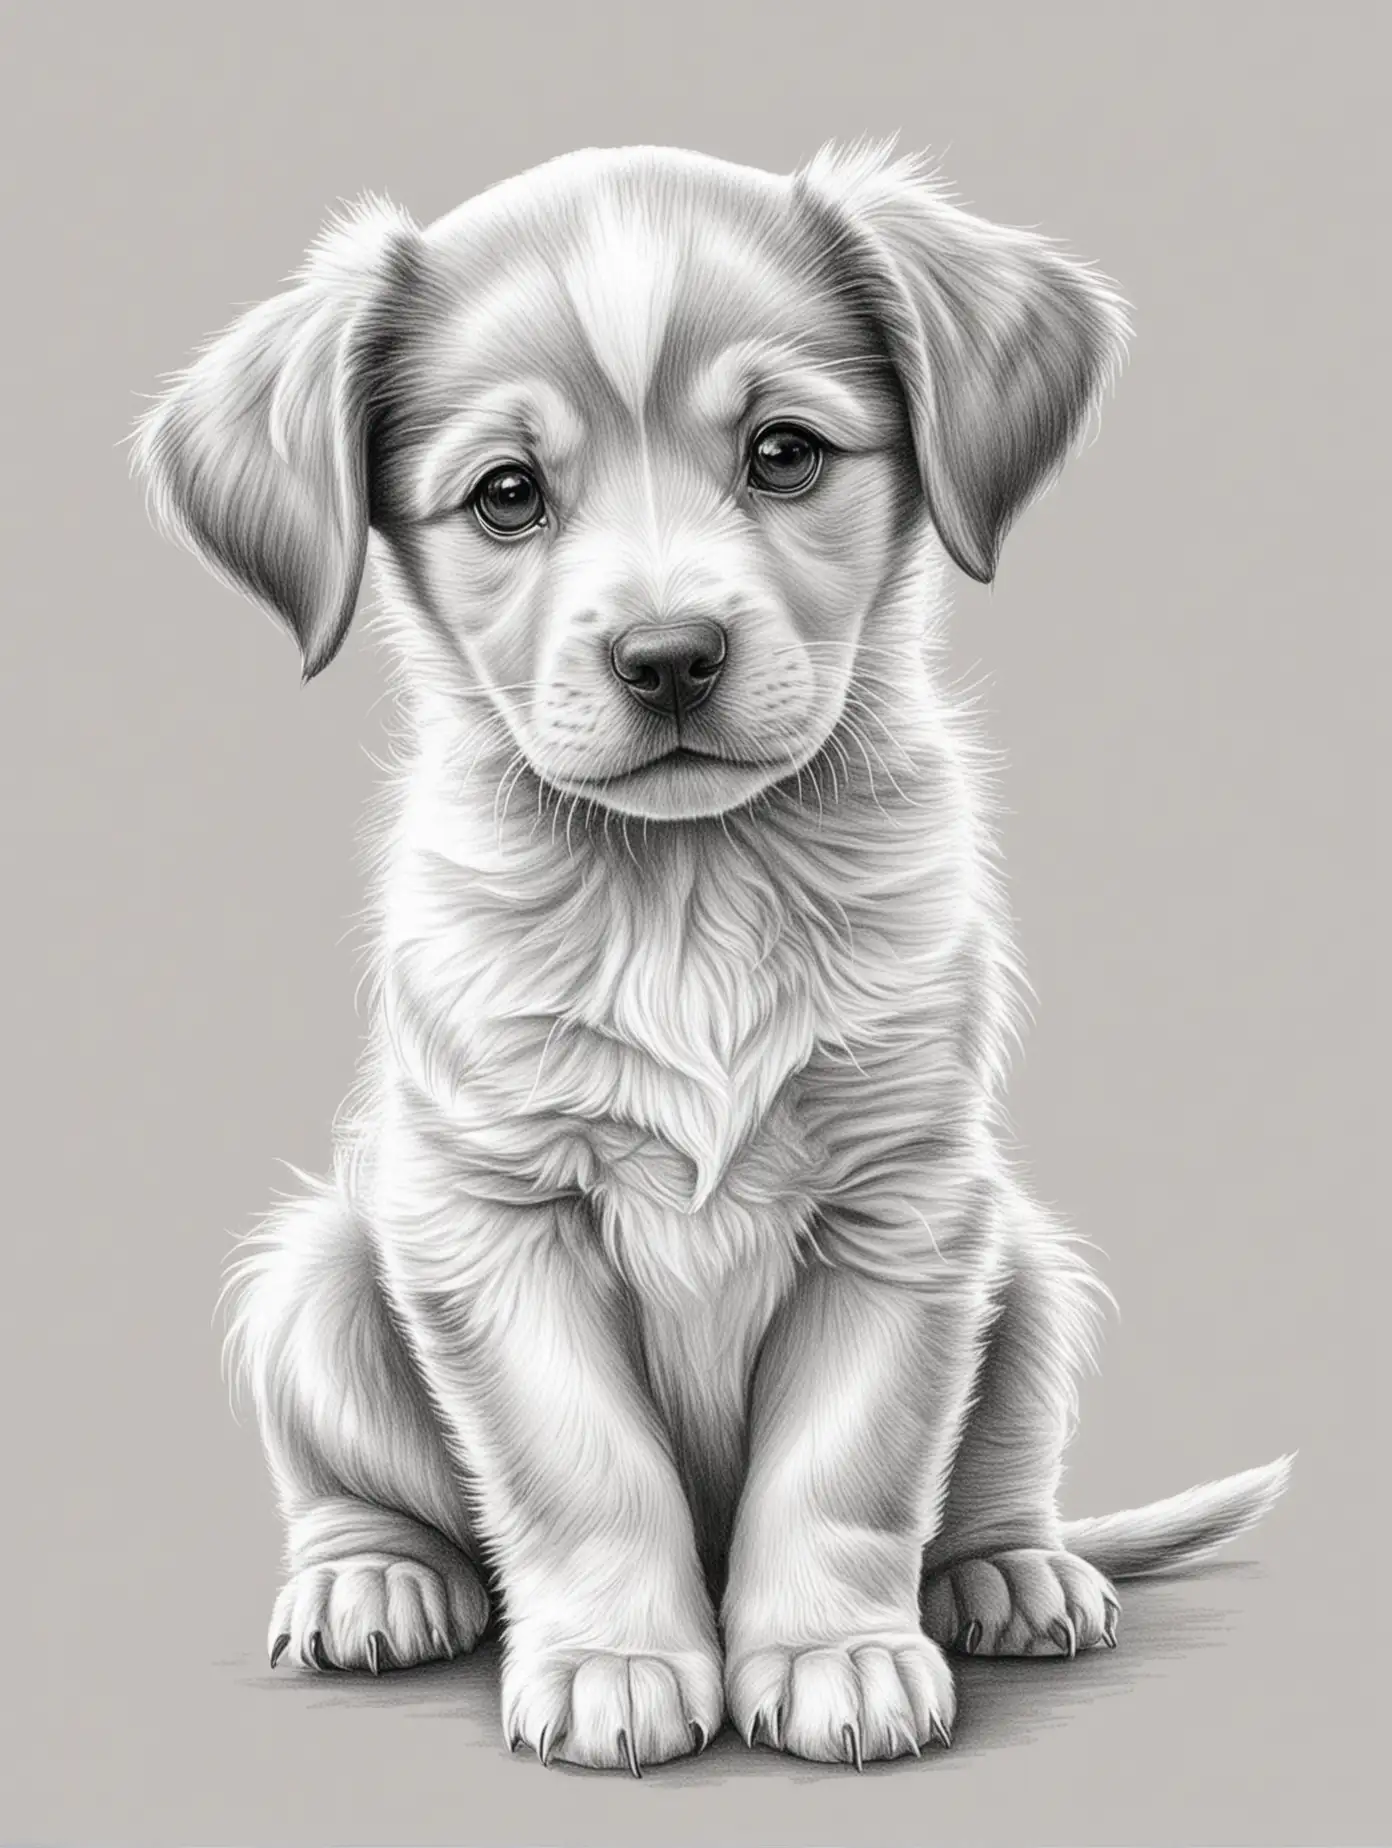 Cute puppy pencil sketch, for a children's colouring book, no background